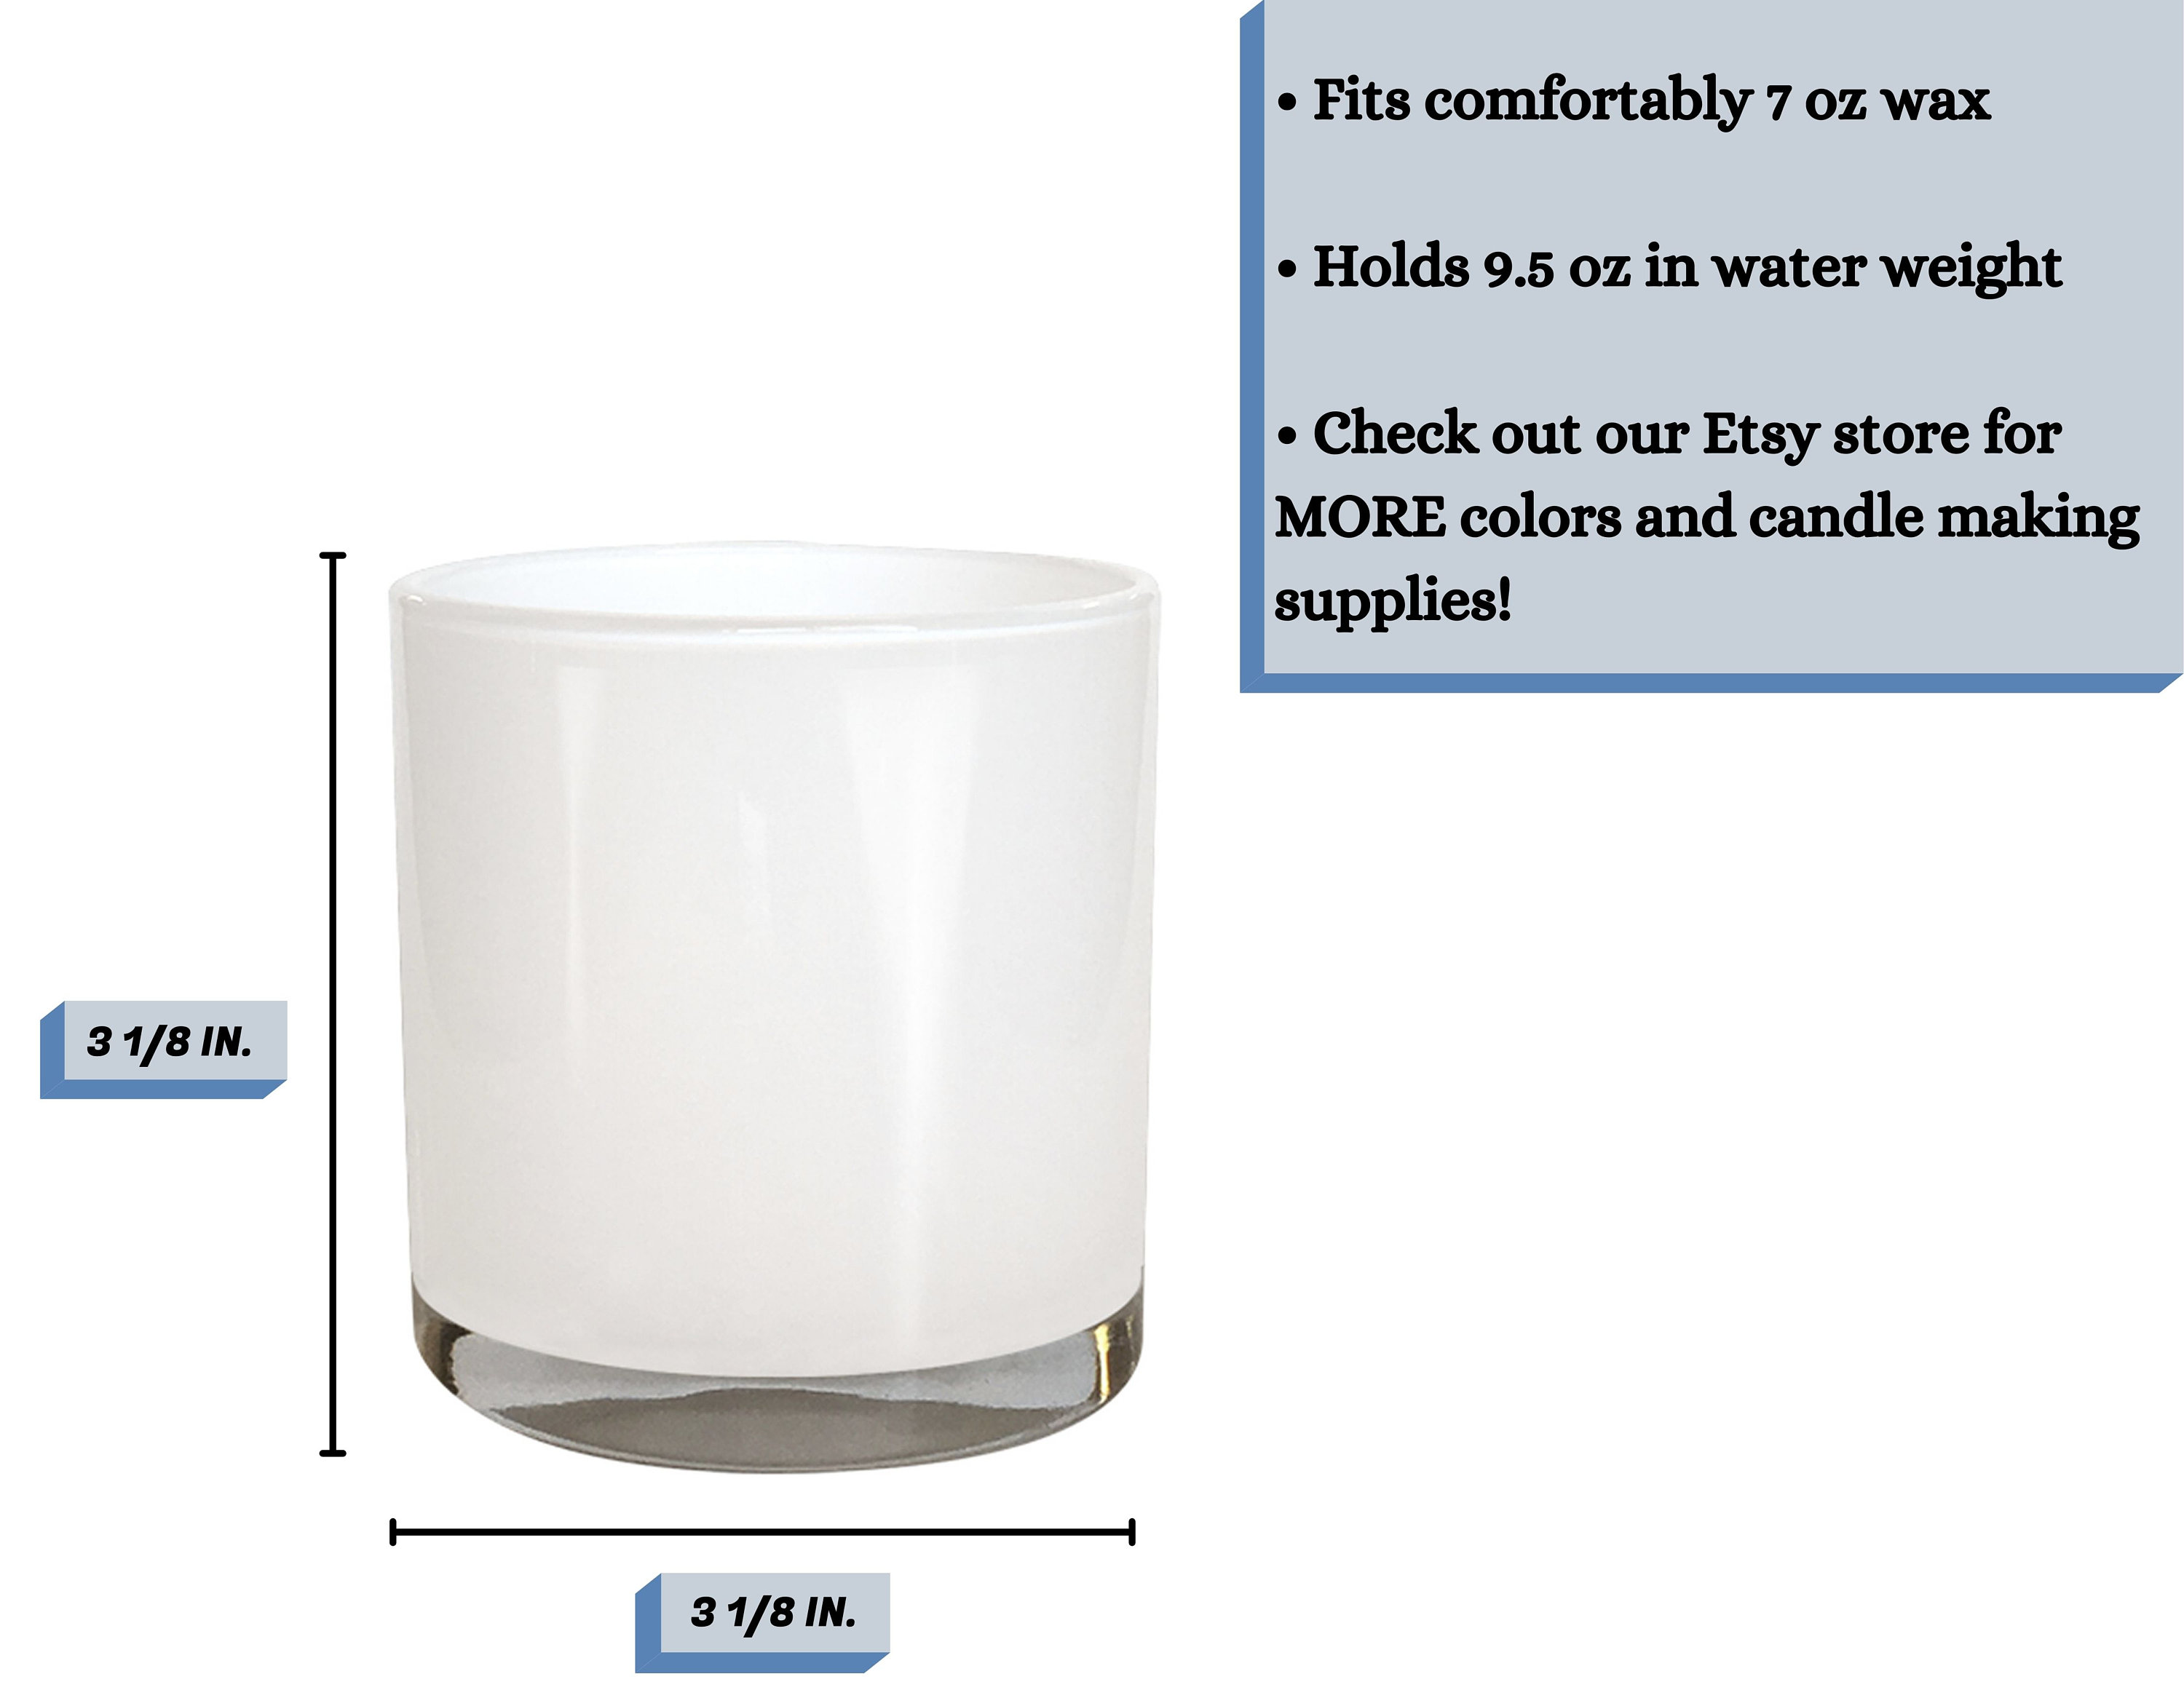 Glass Candle Jars Wholesale and Supplier